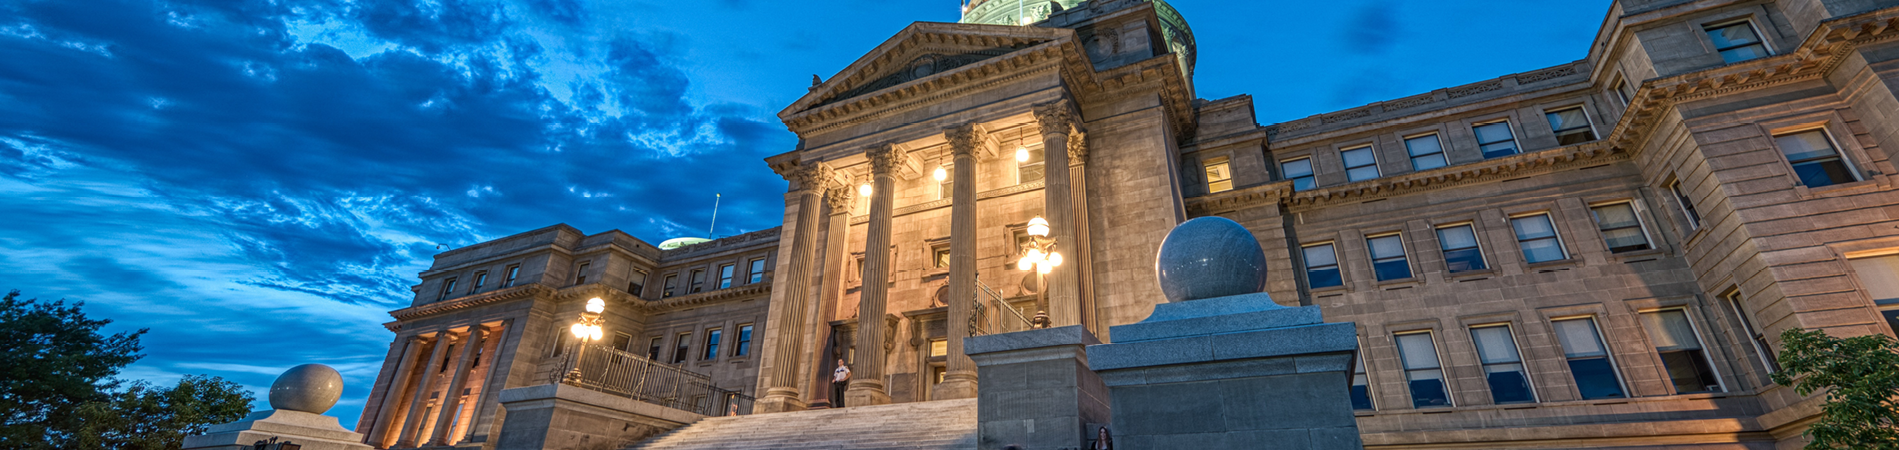 Commercial Insurance Coverage in Boise, Idaho - Photo of Boise Capitol Building